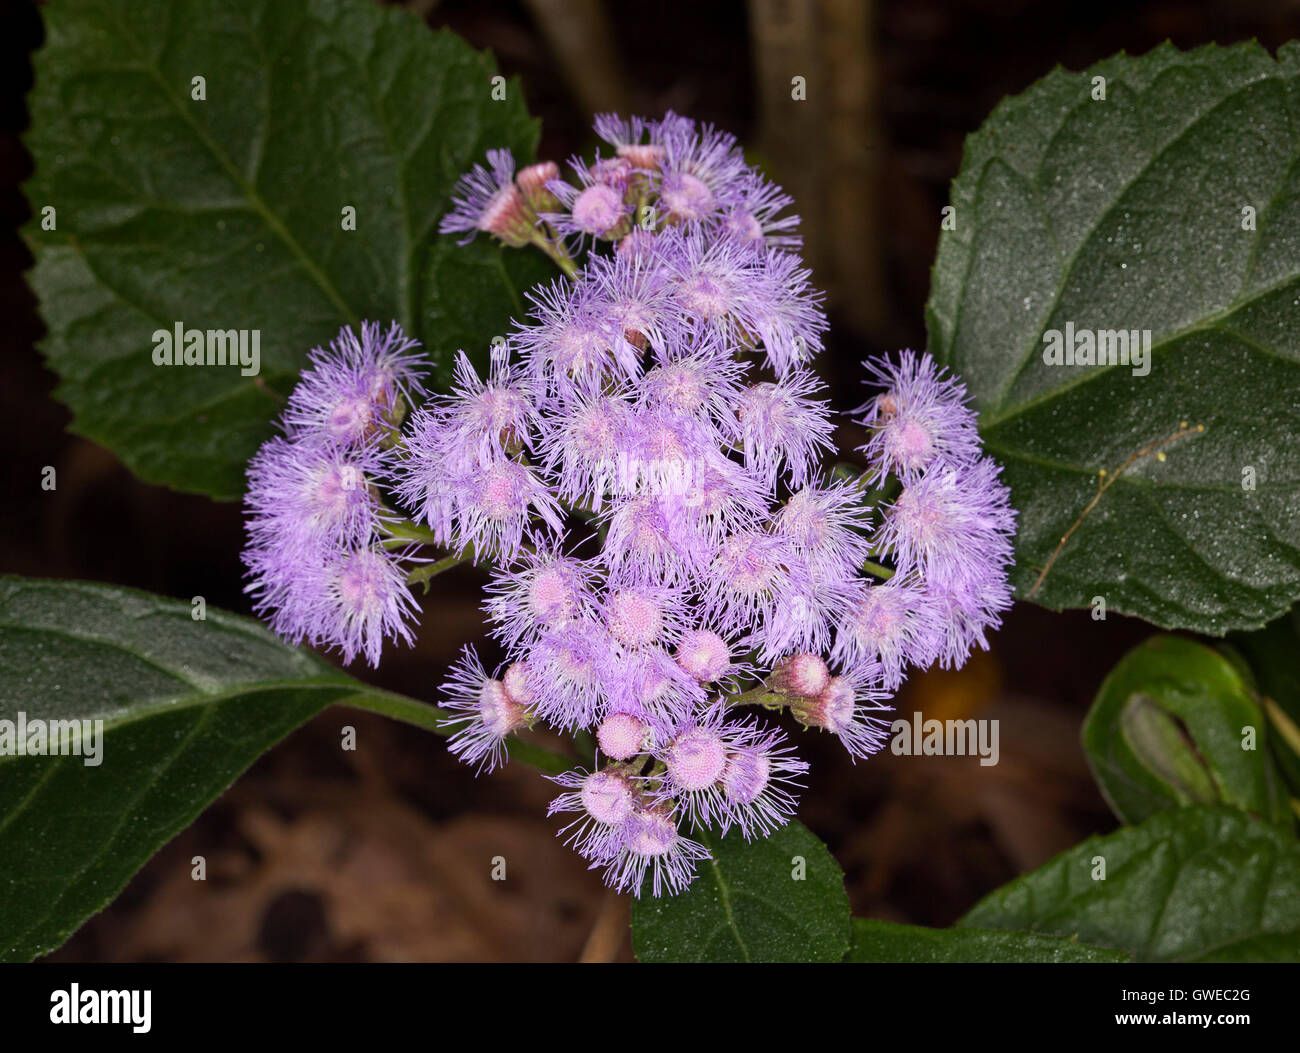 Large cluster of fluffy mauve flowers & dk leaves of Bartlettina sordida nana syn Eupatorium, Mexican mist / purple torch flower Stock Photo